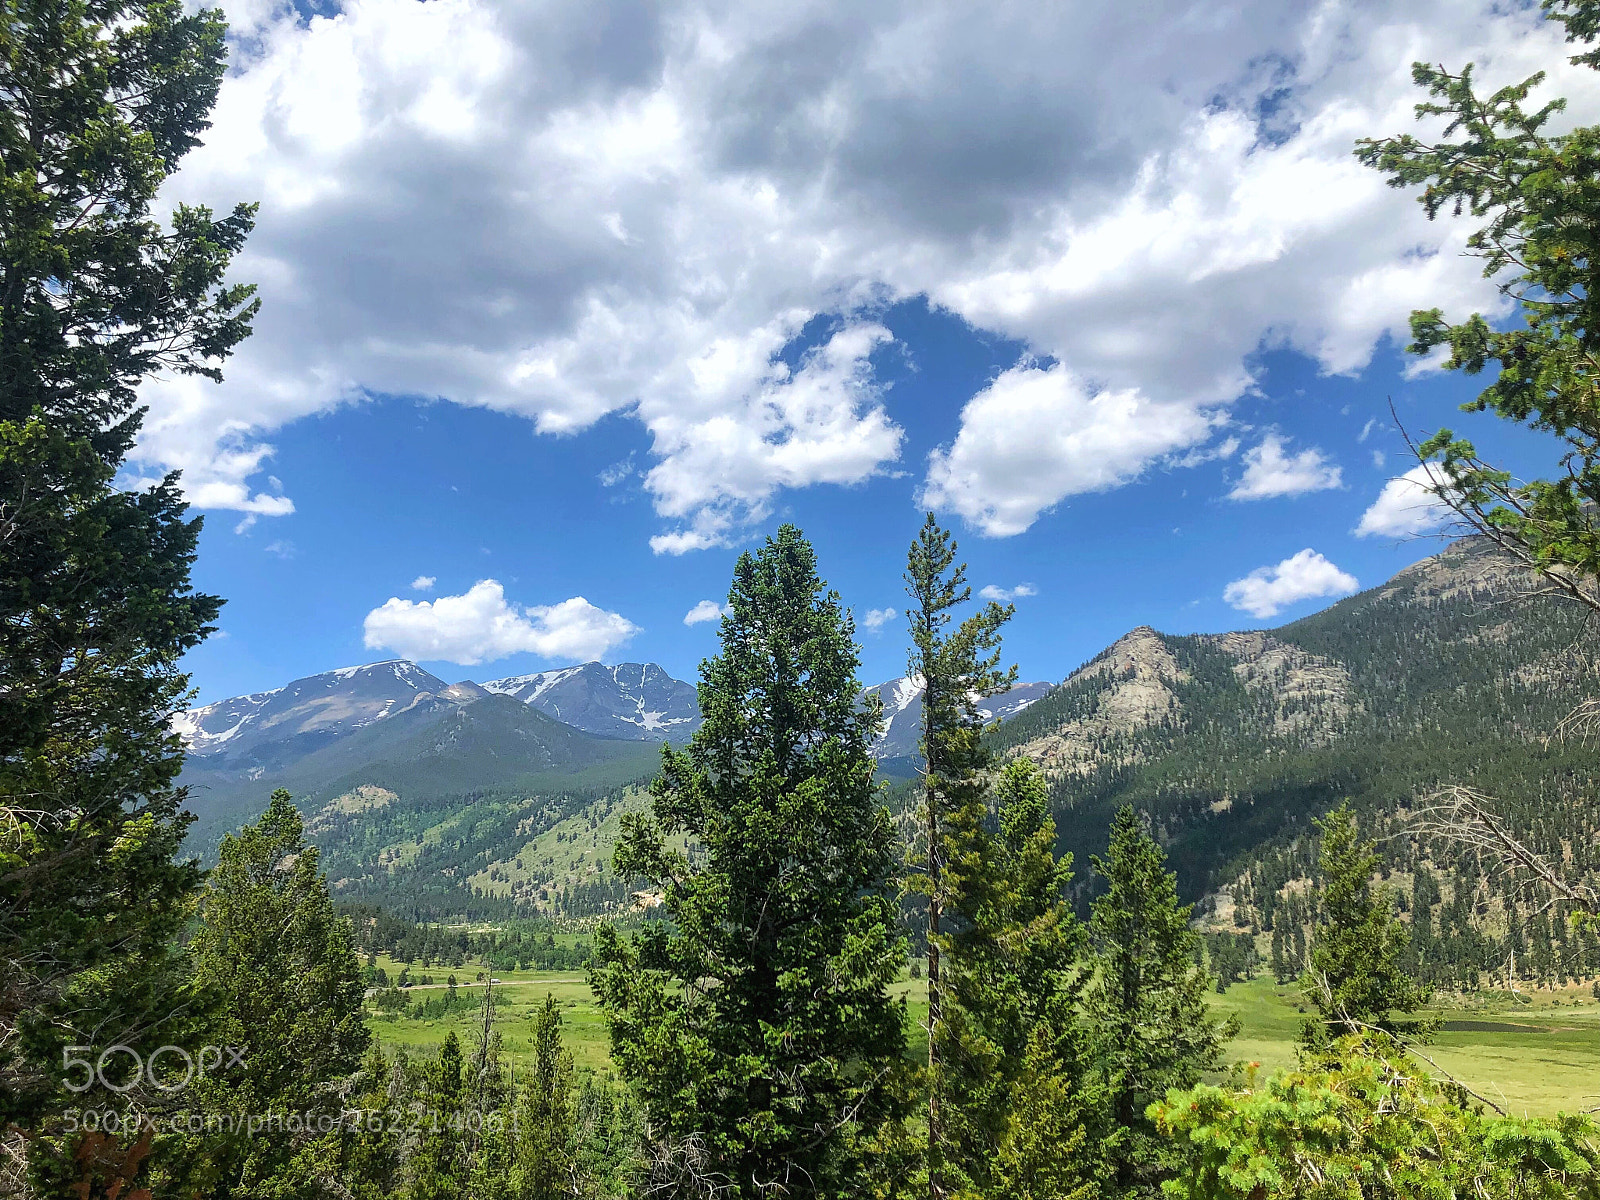 Apple iPhone 8 Plus sample photo. Rocky mountain national park photography